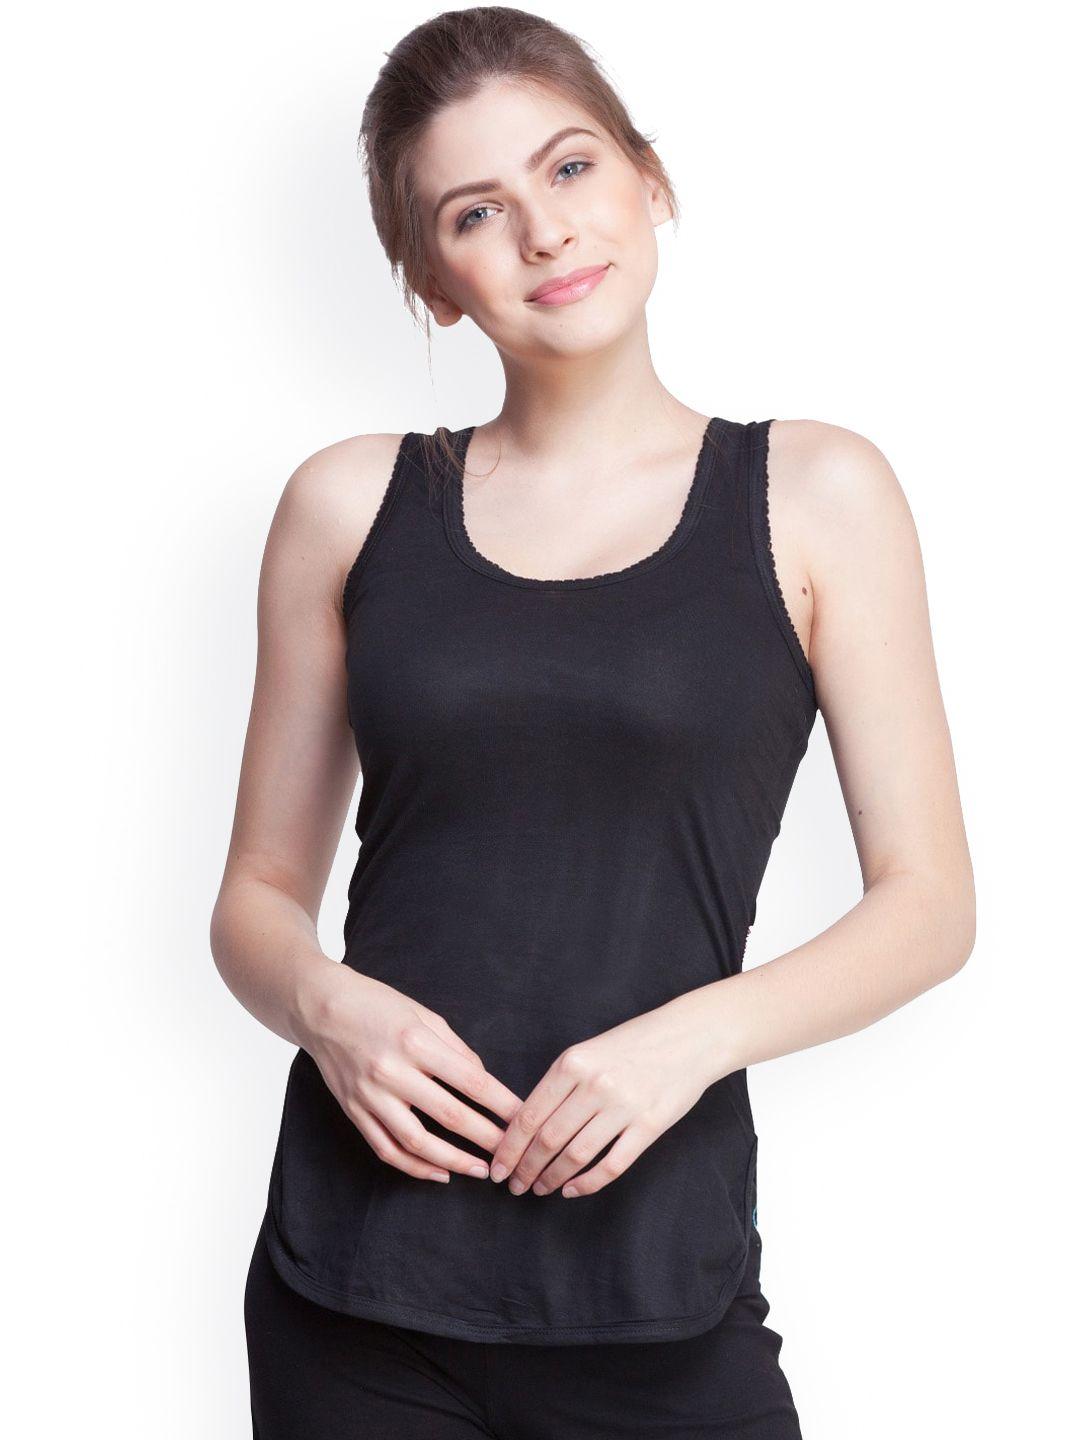 dollar-missy-women-black-solid-non-padded-camisole